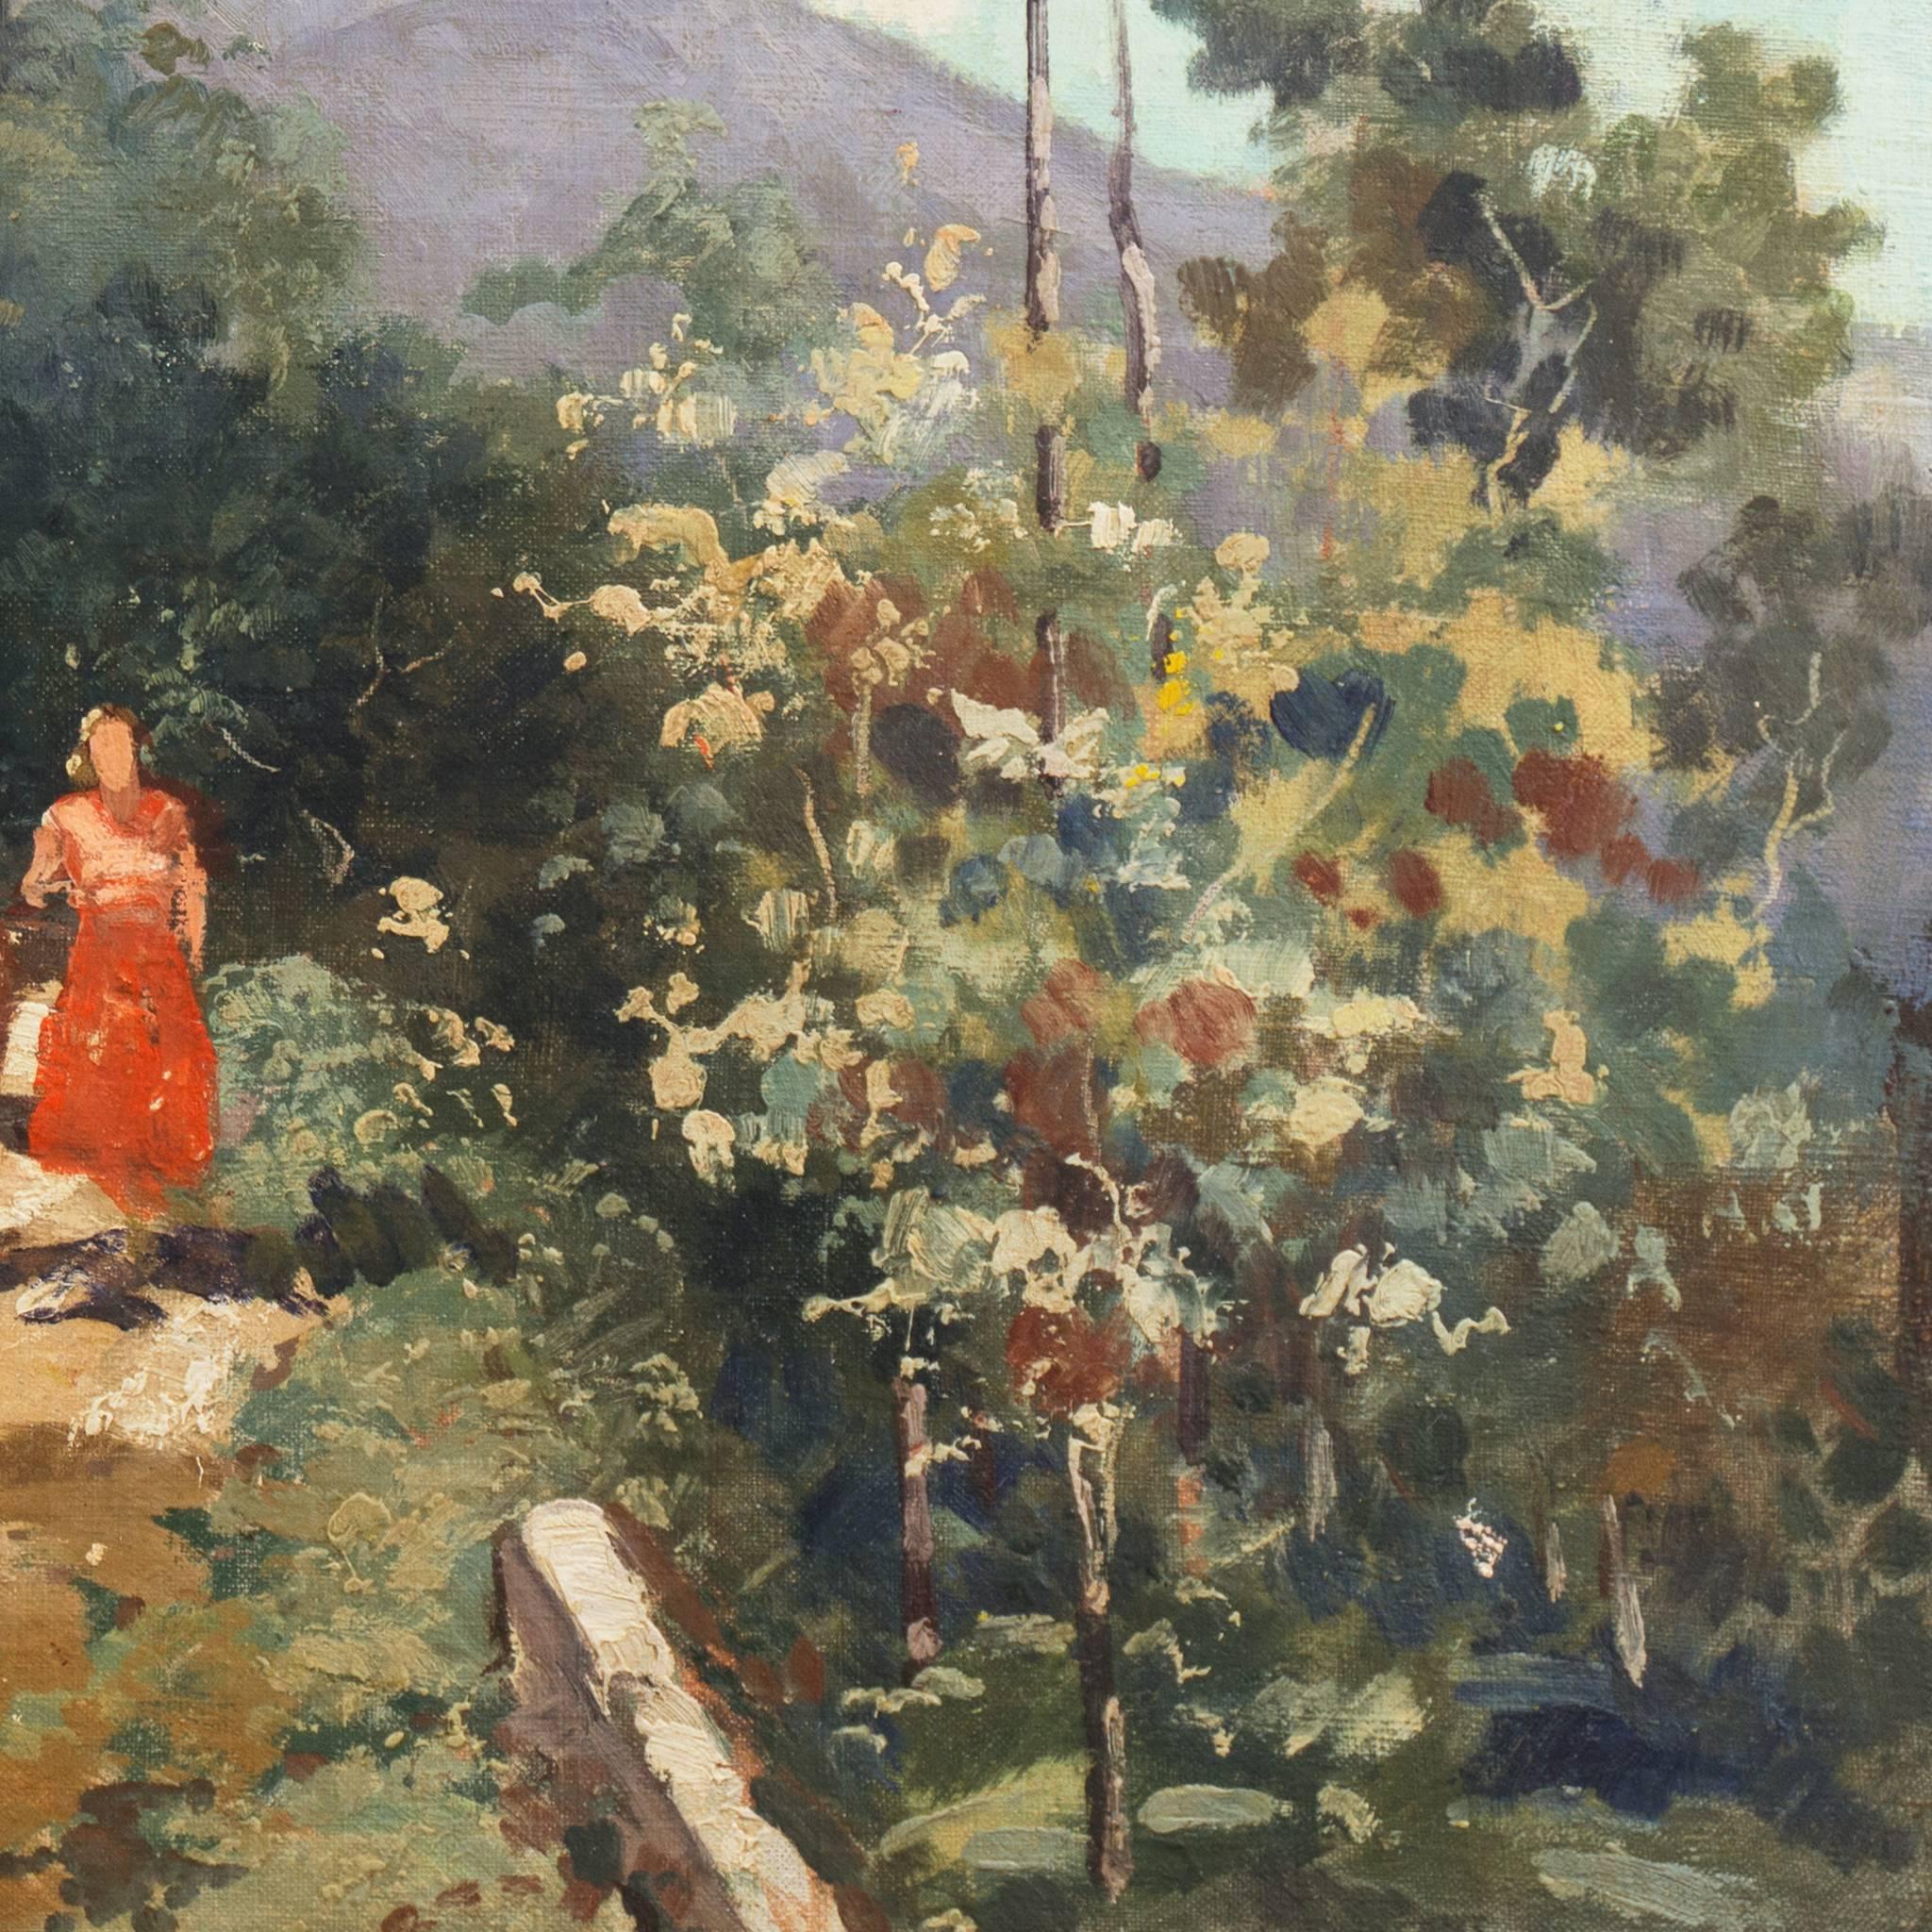 Signed lower left, 'I. Giannaccini' and inscribed 'Sant Agata Italia'.

Oil landscape showing a young woman wearing a rust colored dress, leading a donkey down a dirt path bordered by a stone wall with an arched doorway and lush greenery.

Known for